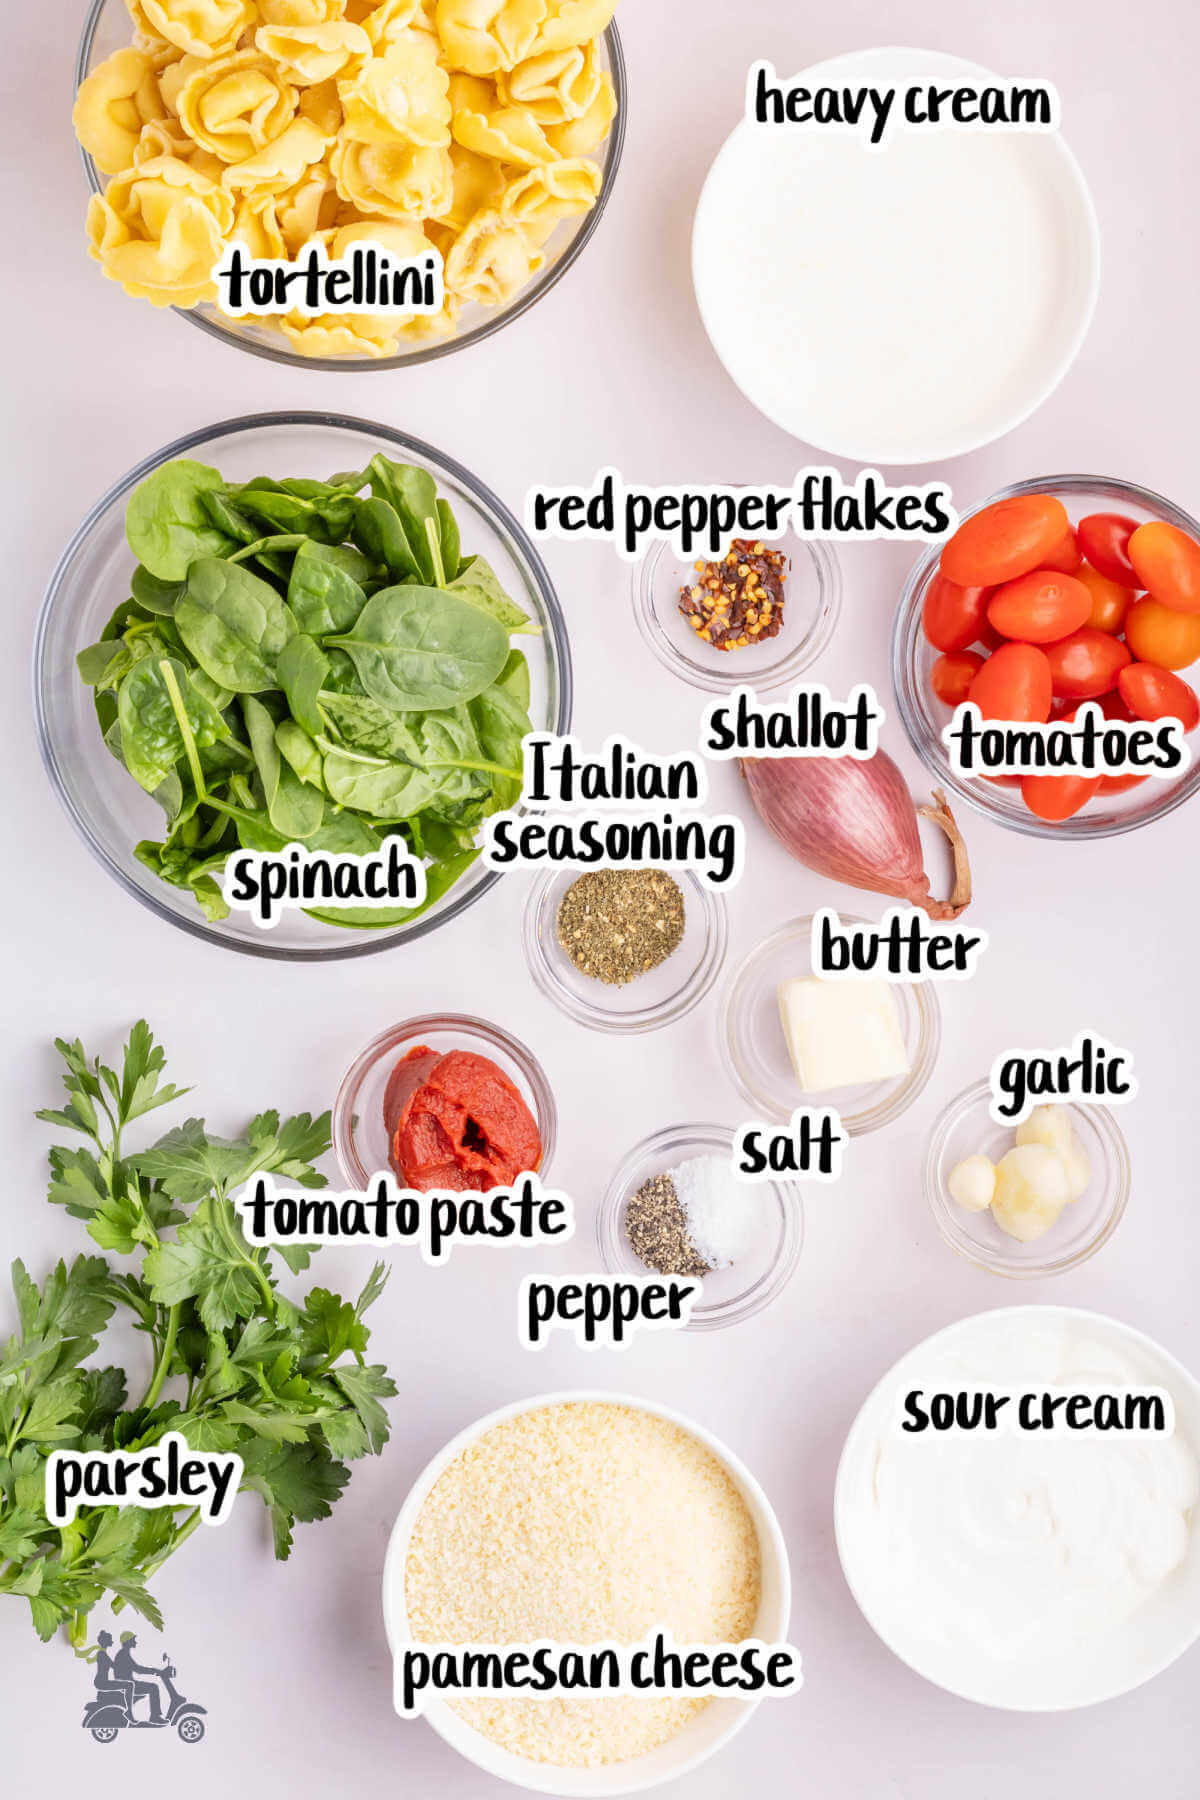 Image of the ingredients necessary to make the one-pot tortellini recipe. 